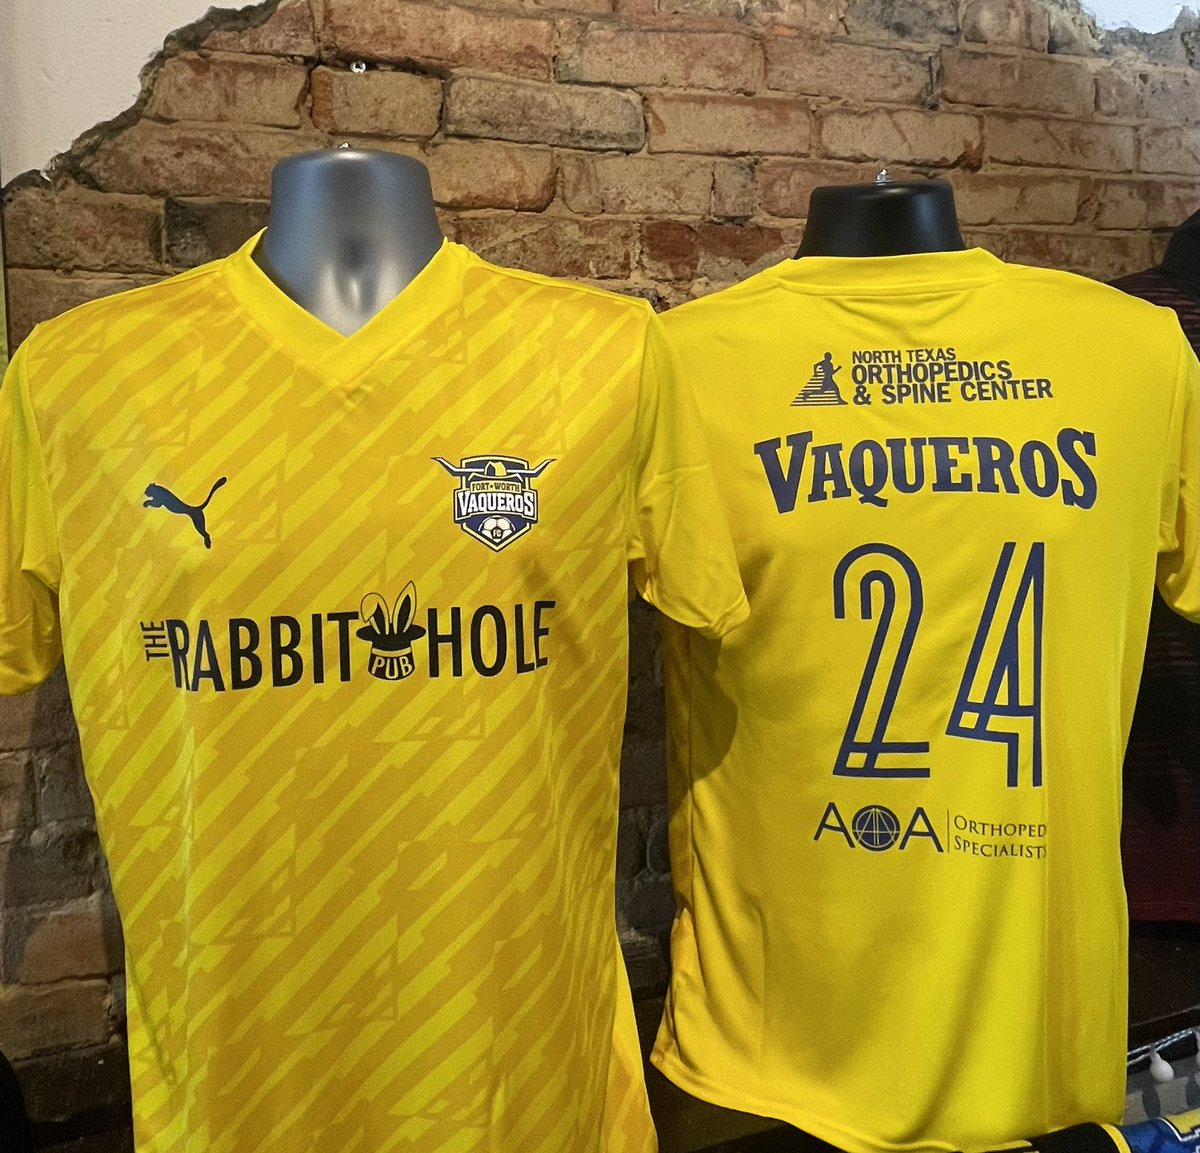 Look forward to having these beauties on sale at ProRel Soccer Shop. Looking good @FtWorthVaqueros #SupportLocalSoccer